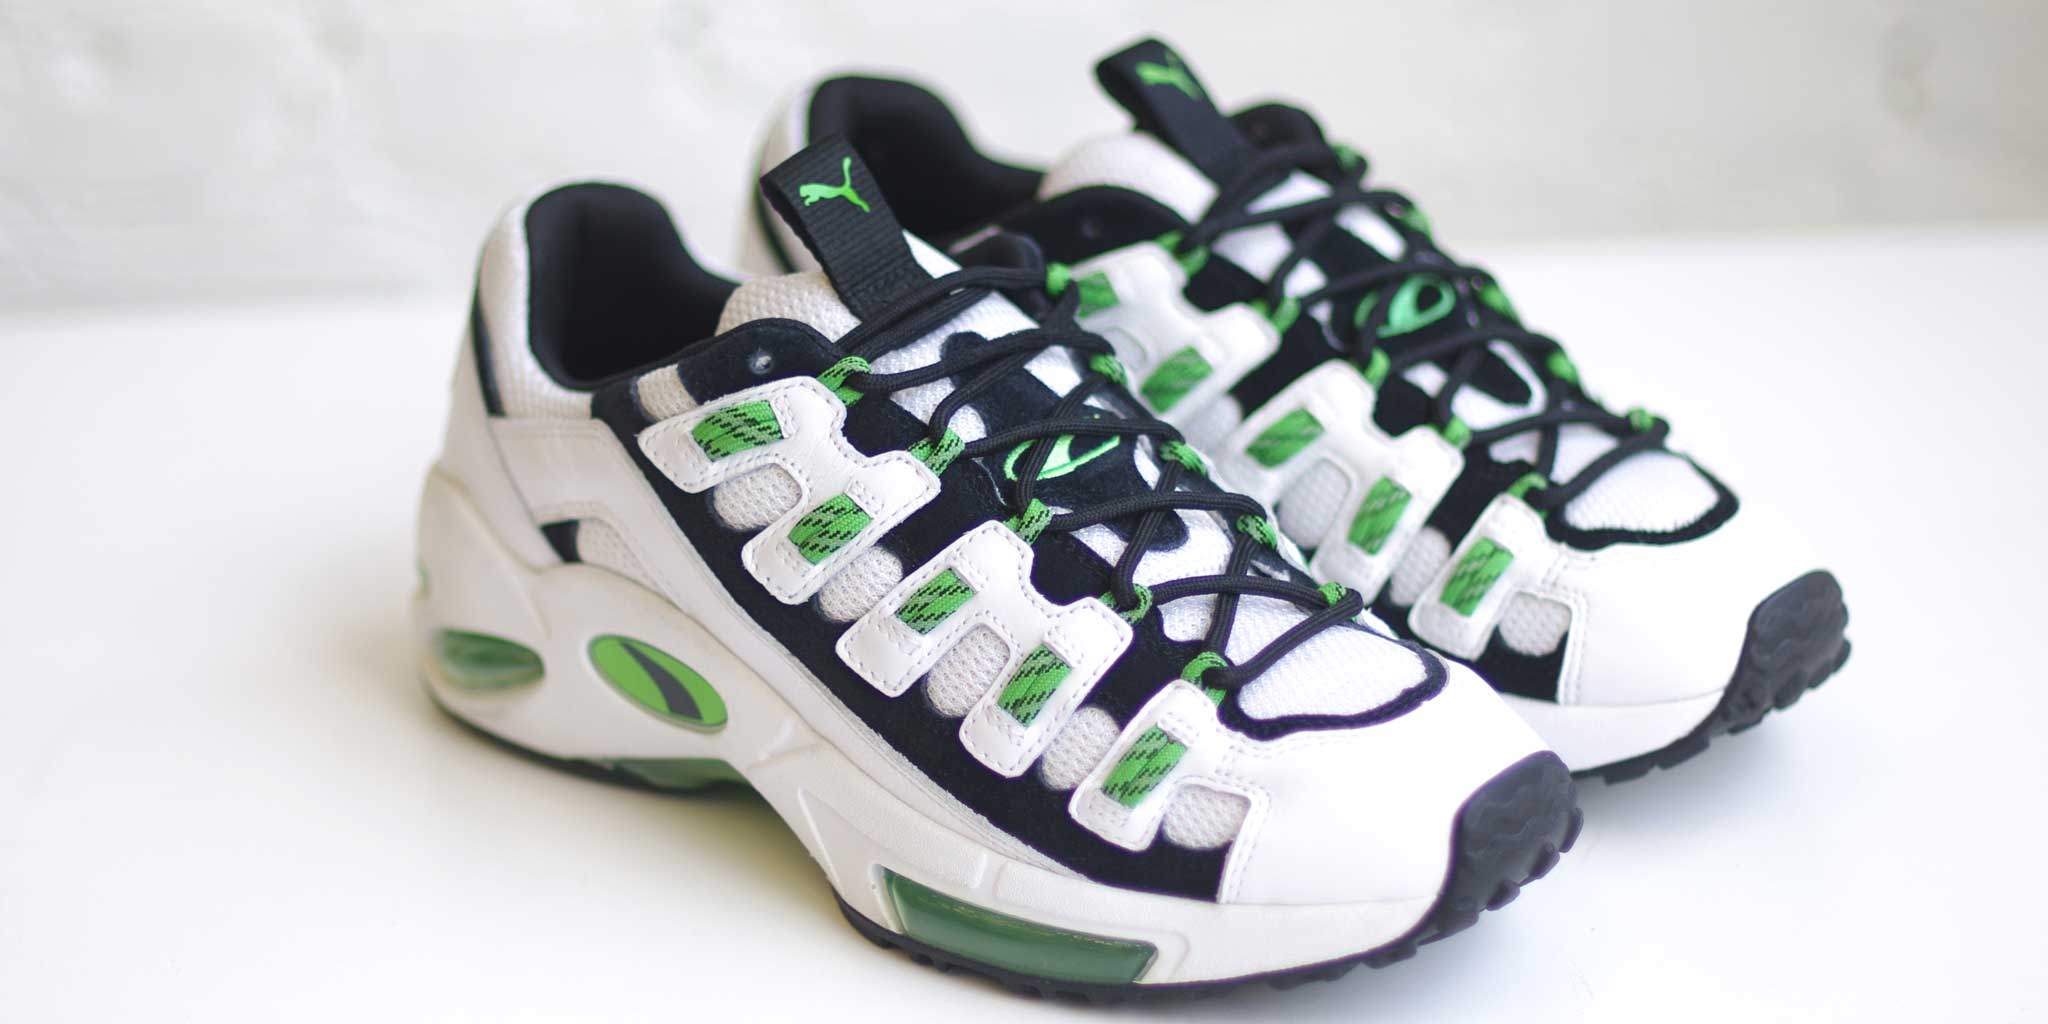 Pair of Puma Cell Endura Trainers